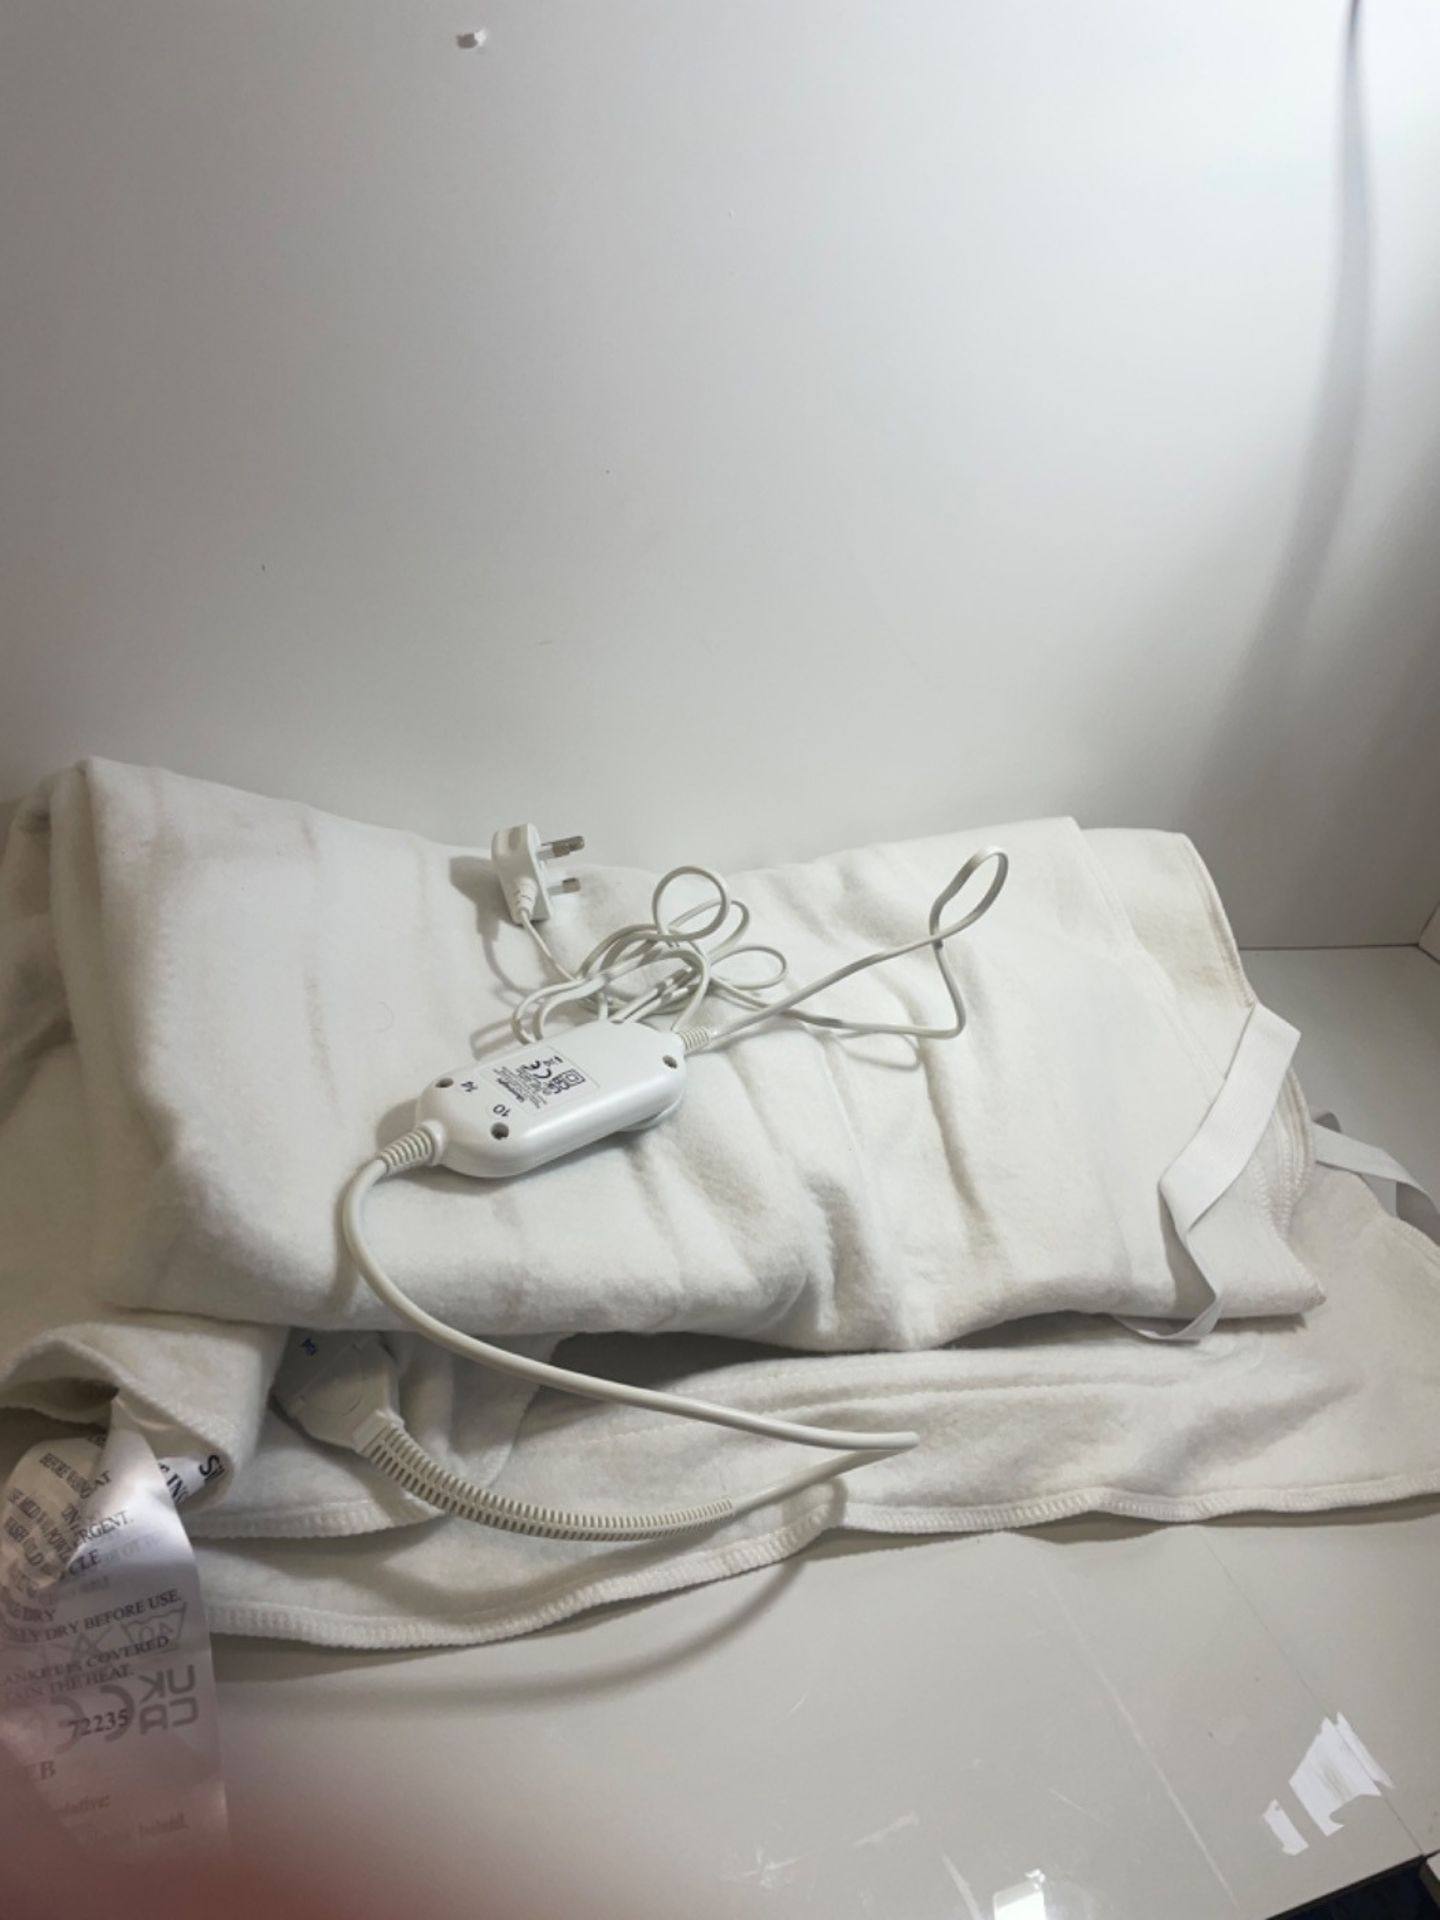 Silentnight Comfort Control Electric Blanket - Heated Electric Fitted Underblanket With 3 Heat Se... - Image 3 of 3